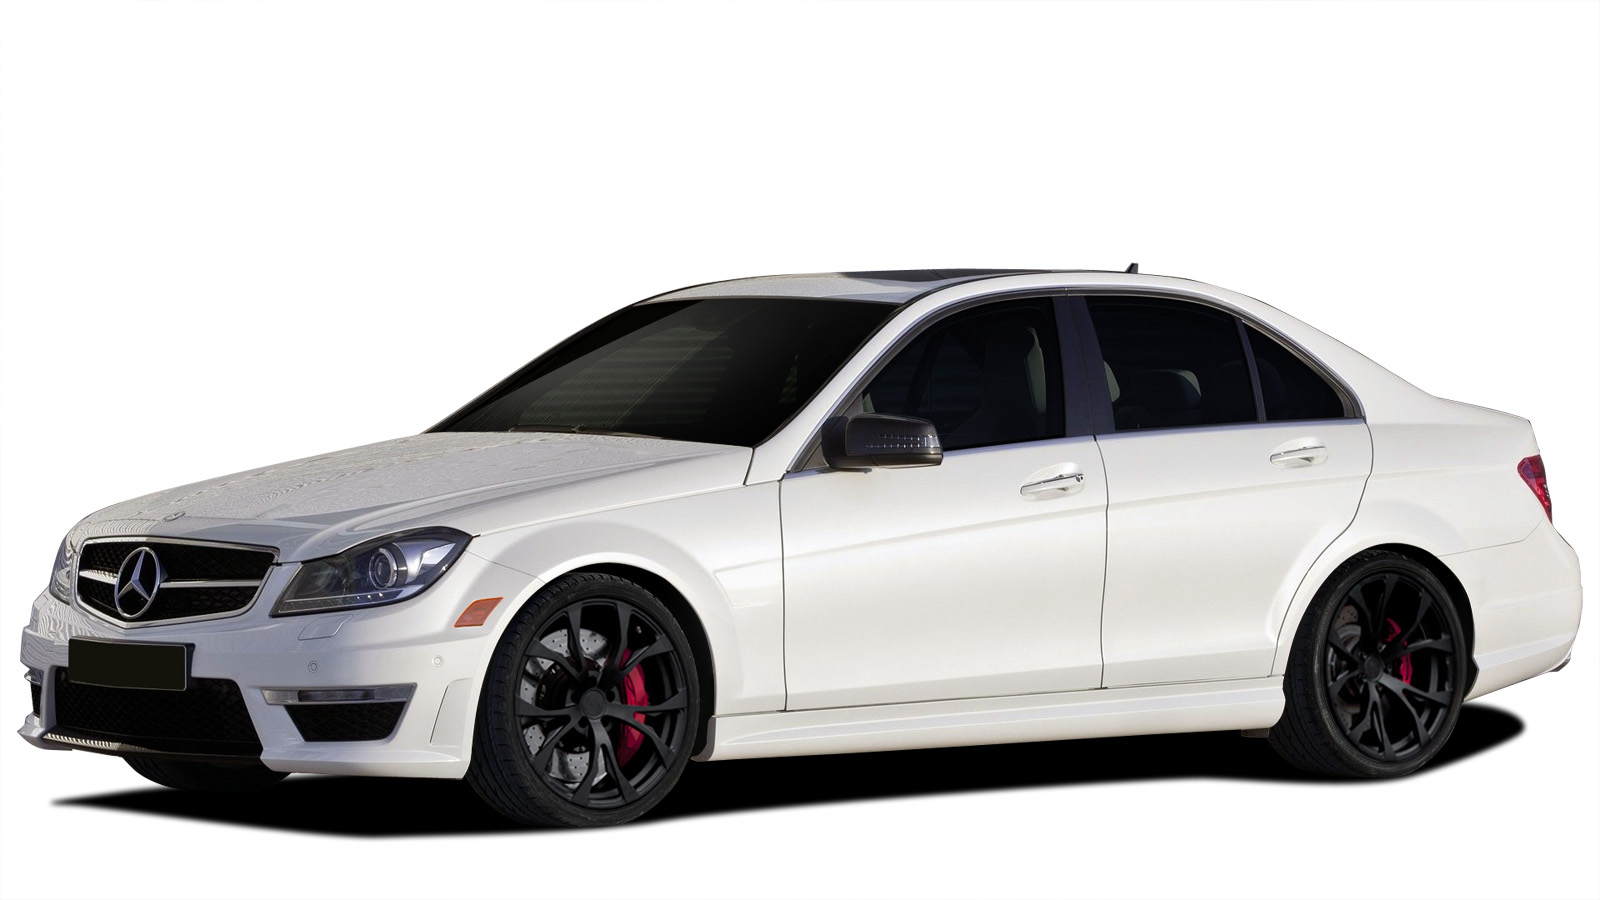 2012 Mercedes C Class ALL - Polypropylene Body Kit Bodykit - Mercedes C Class C350 W204 Vaero C63 Look Conversion Kit ( with PDC ) - 9 Piece - Include